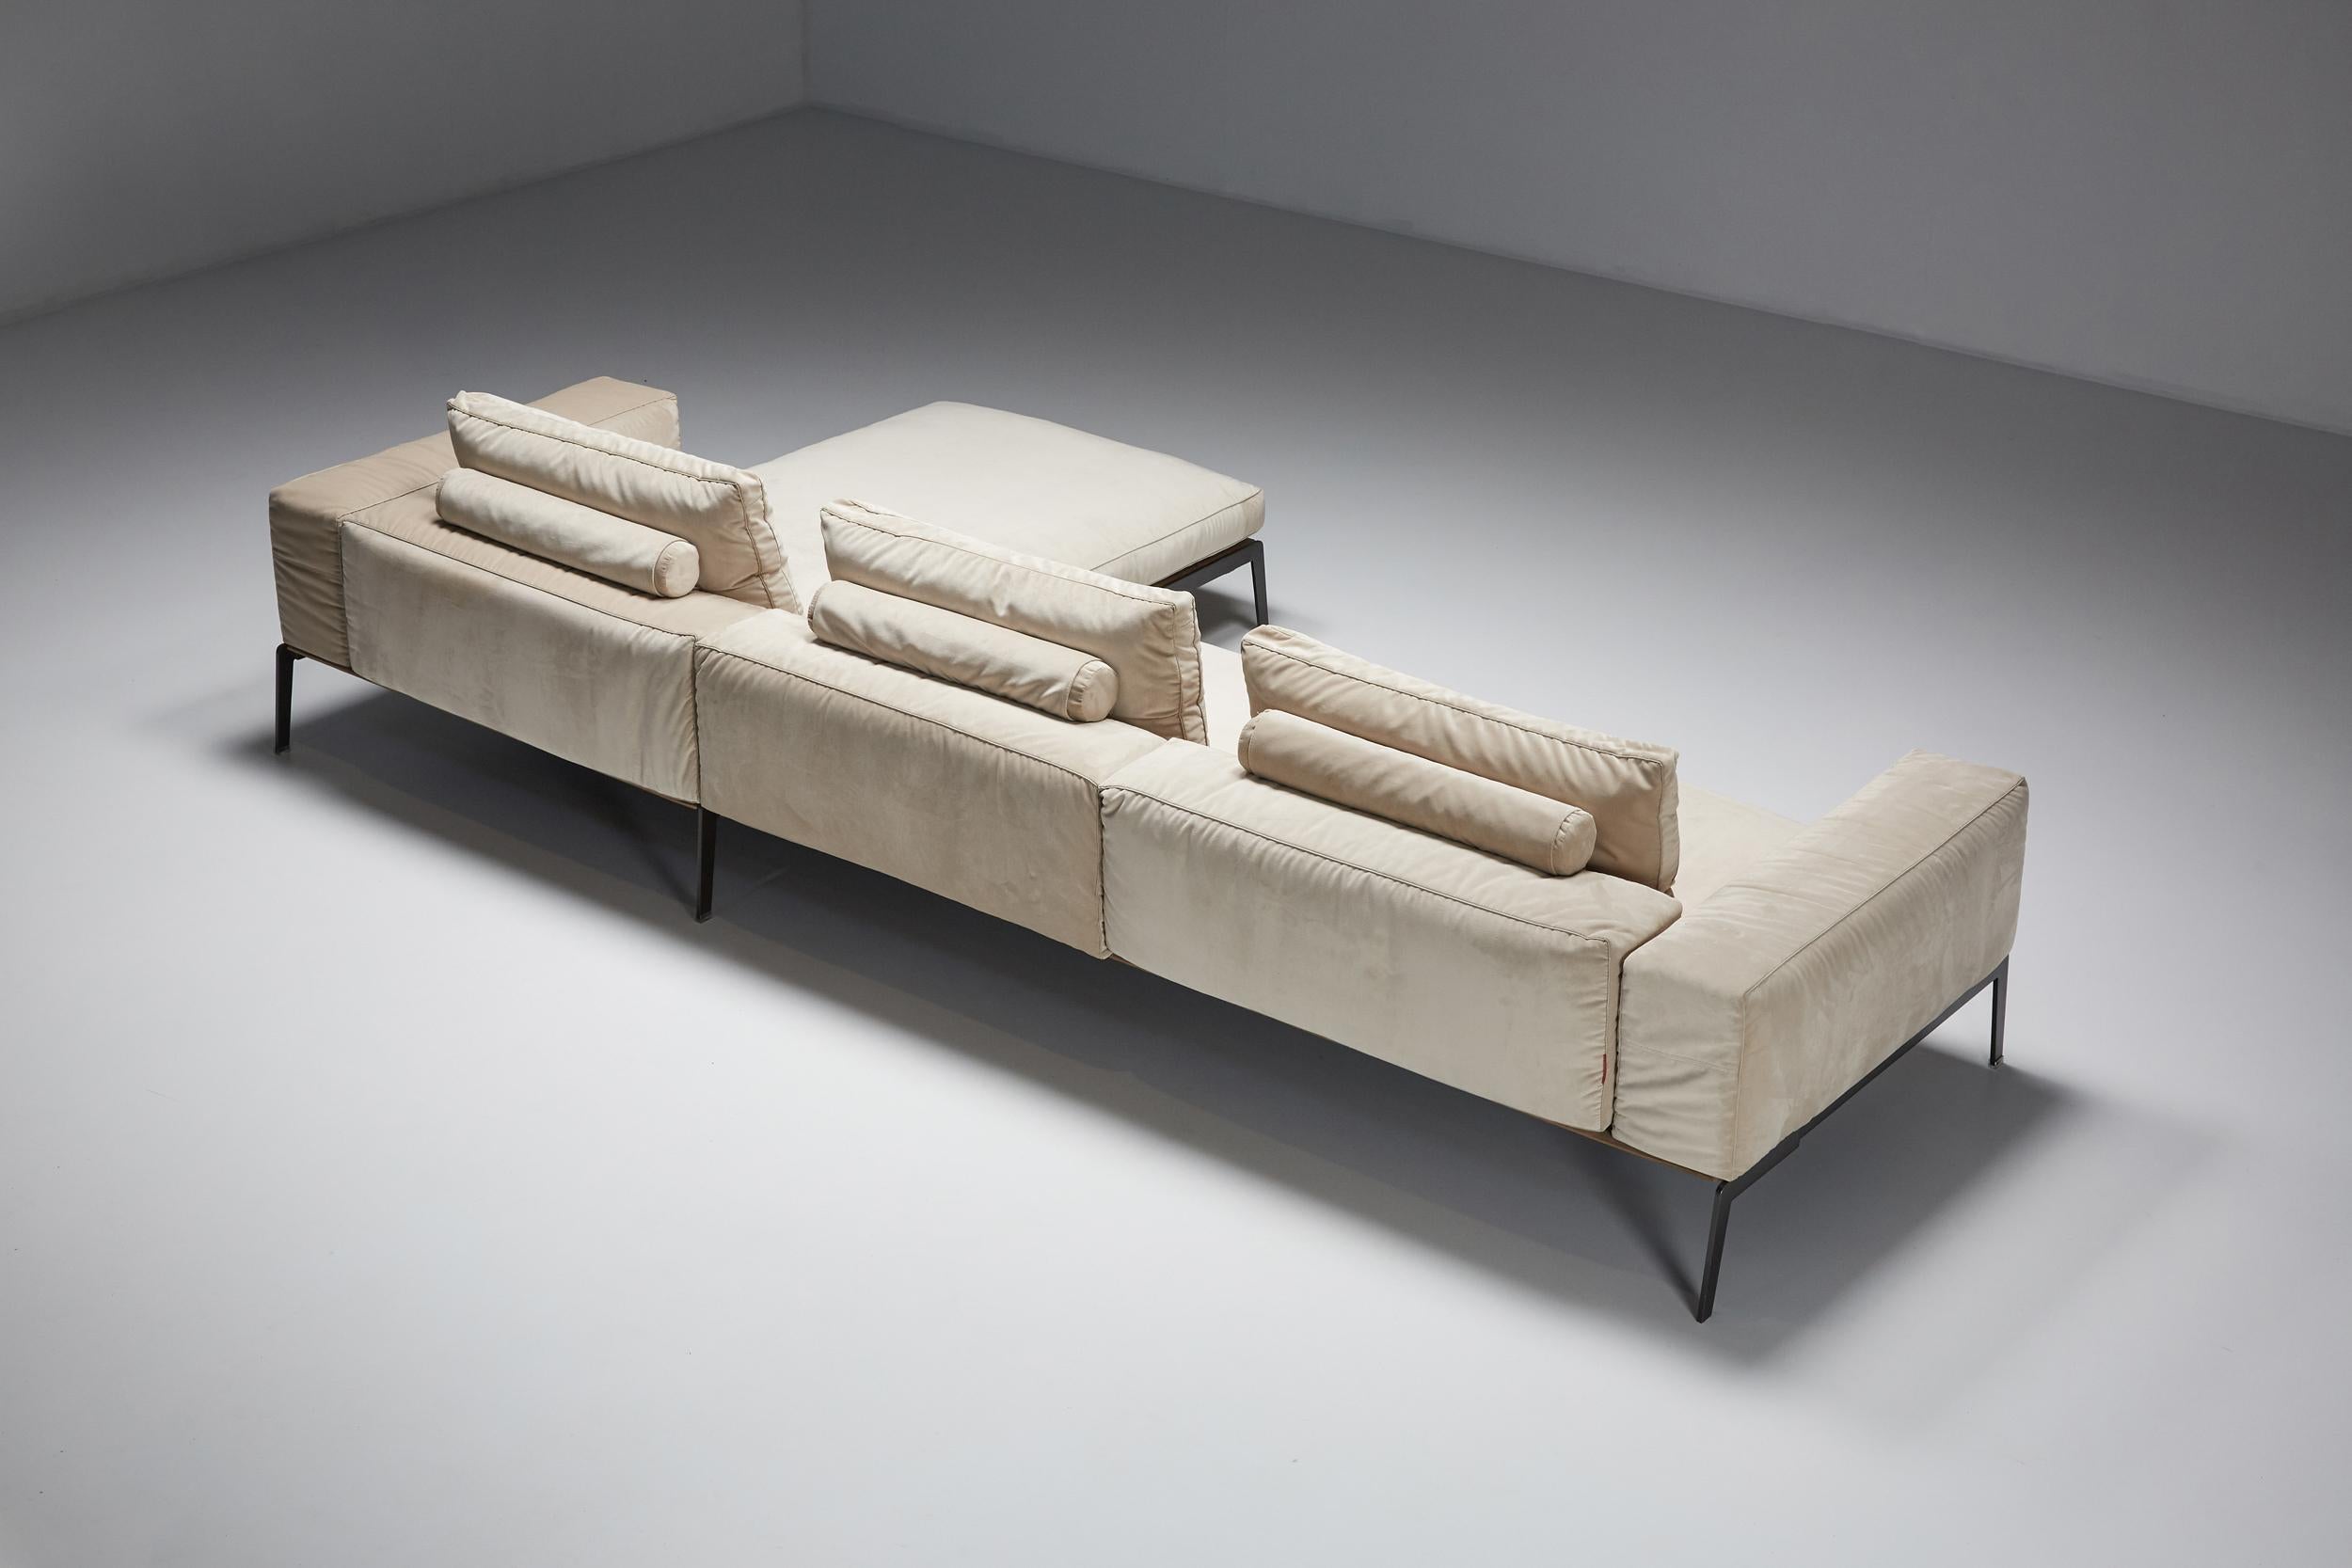 Lifesteel white three seater sofa, by Antonio Citterio for Flexform, originally designed in 2018.

This lifesteel sofa expresses a light, straightforward aesthetic complemented by generous, inviting proportions. The amply-sized rectangular armrest